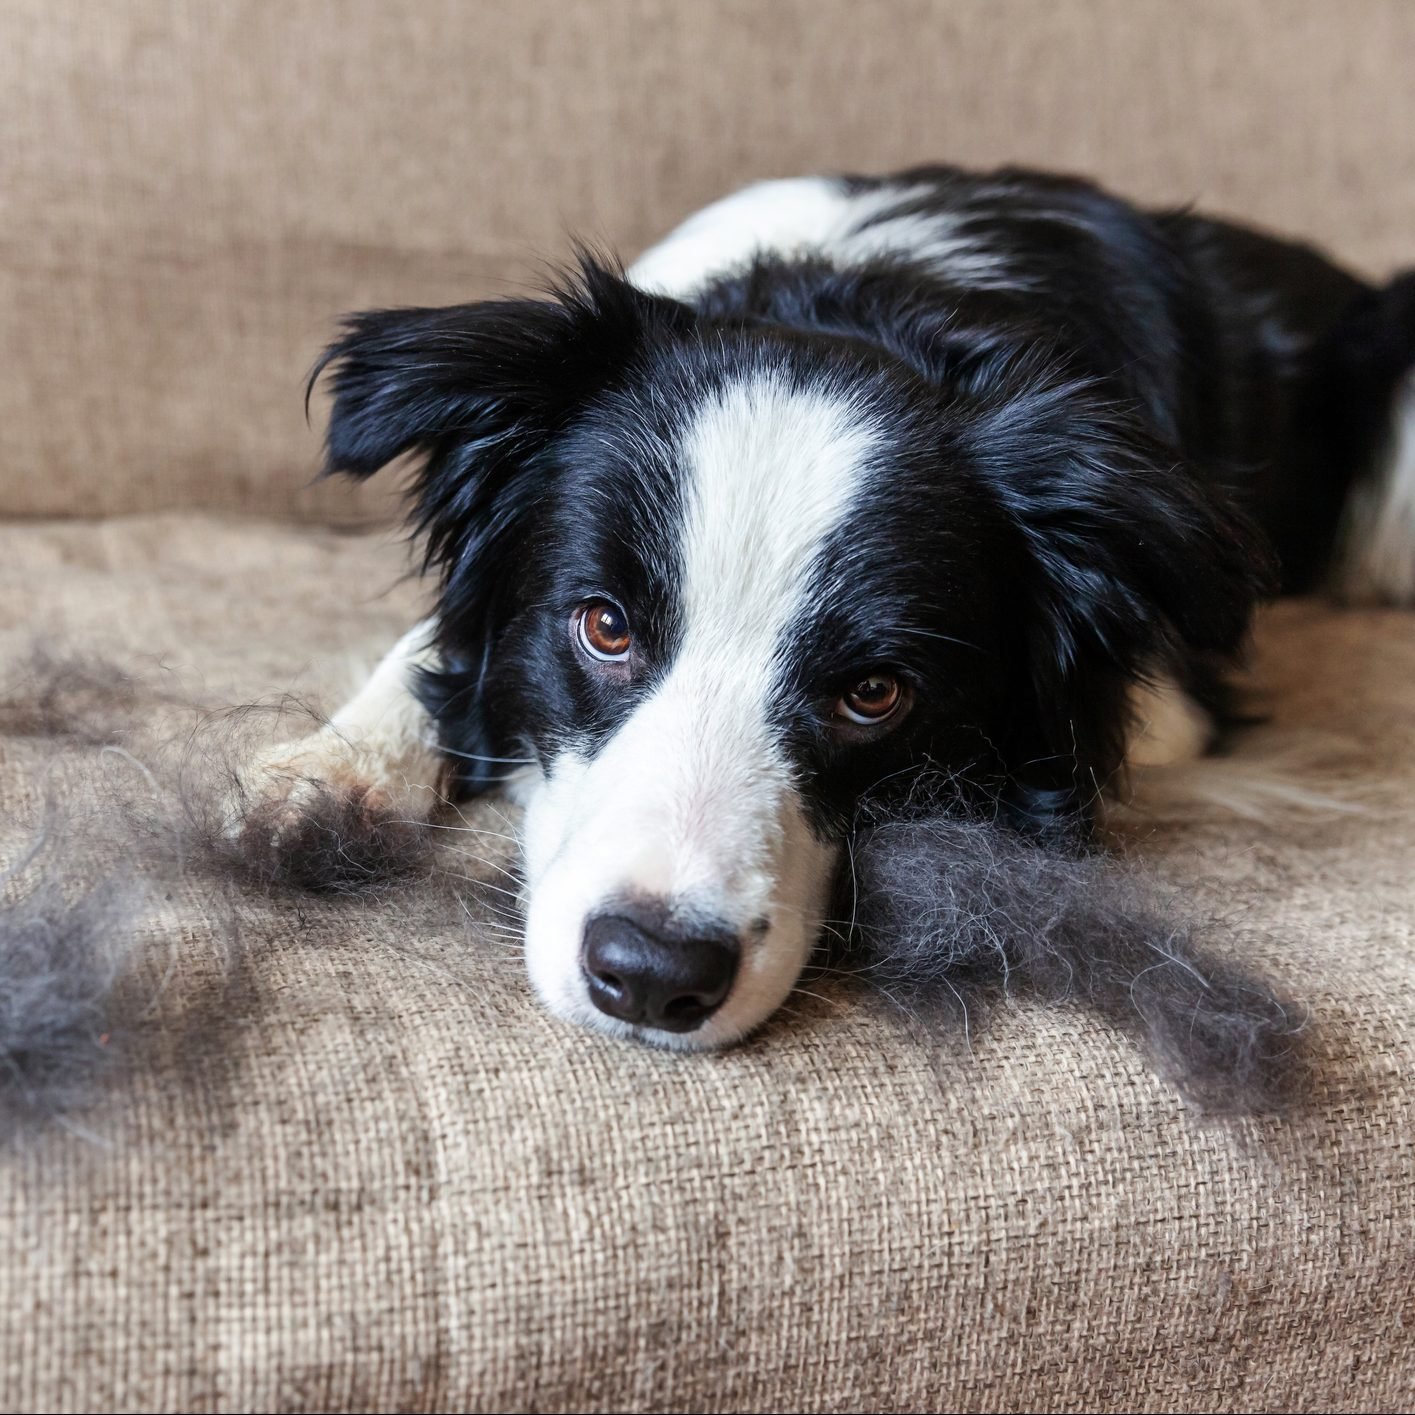 12 Pet Hair Removers That Really Work, According to a Professional